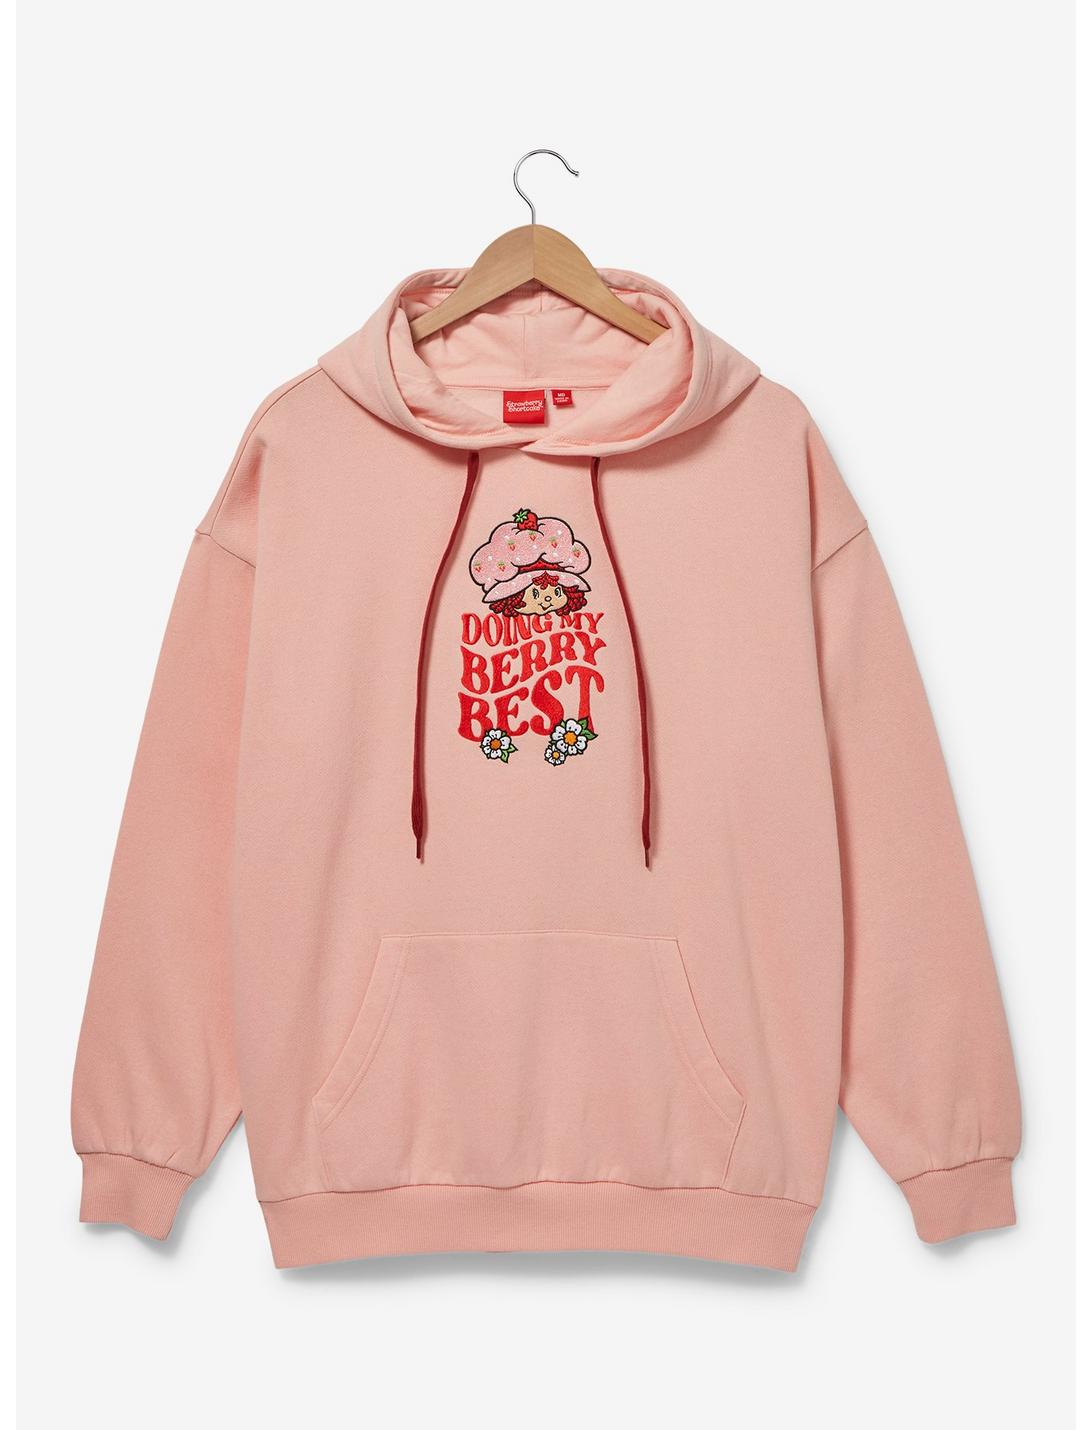 Strawberry Shortcake Doing My Berry Best Hoodie - BoxLunch Exclusive, LIGHT PINK, hi-res